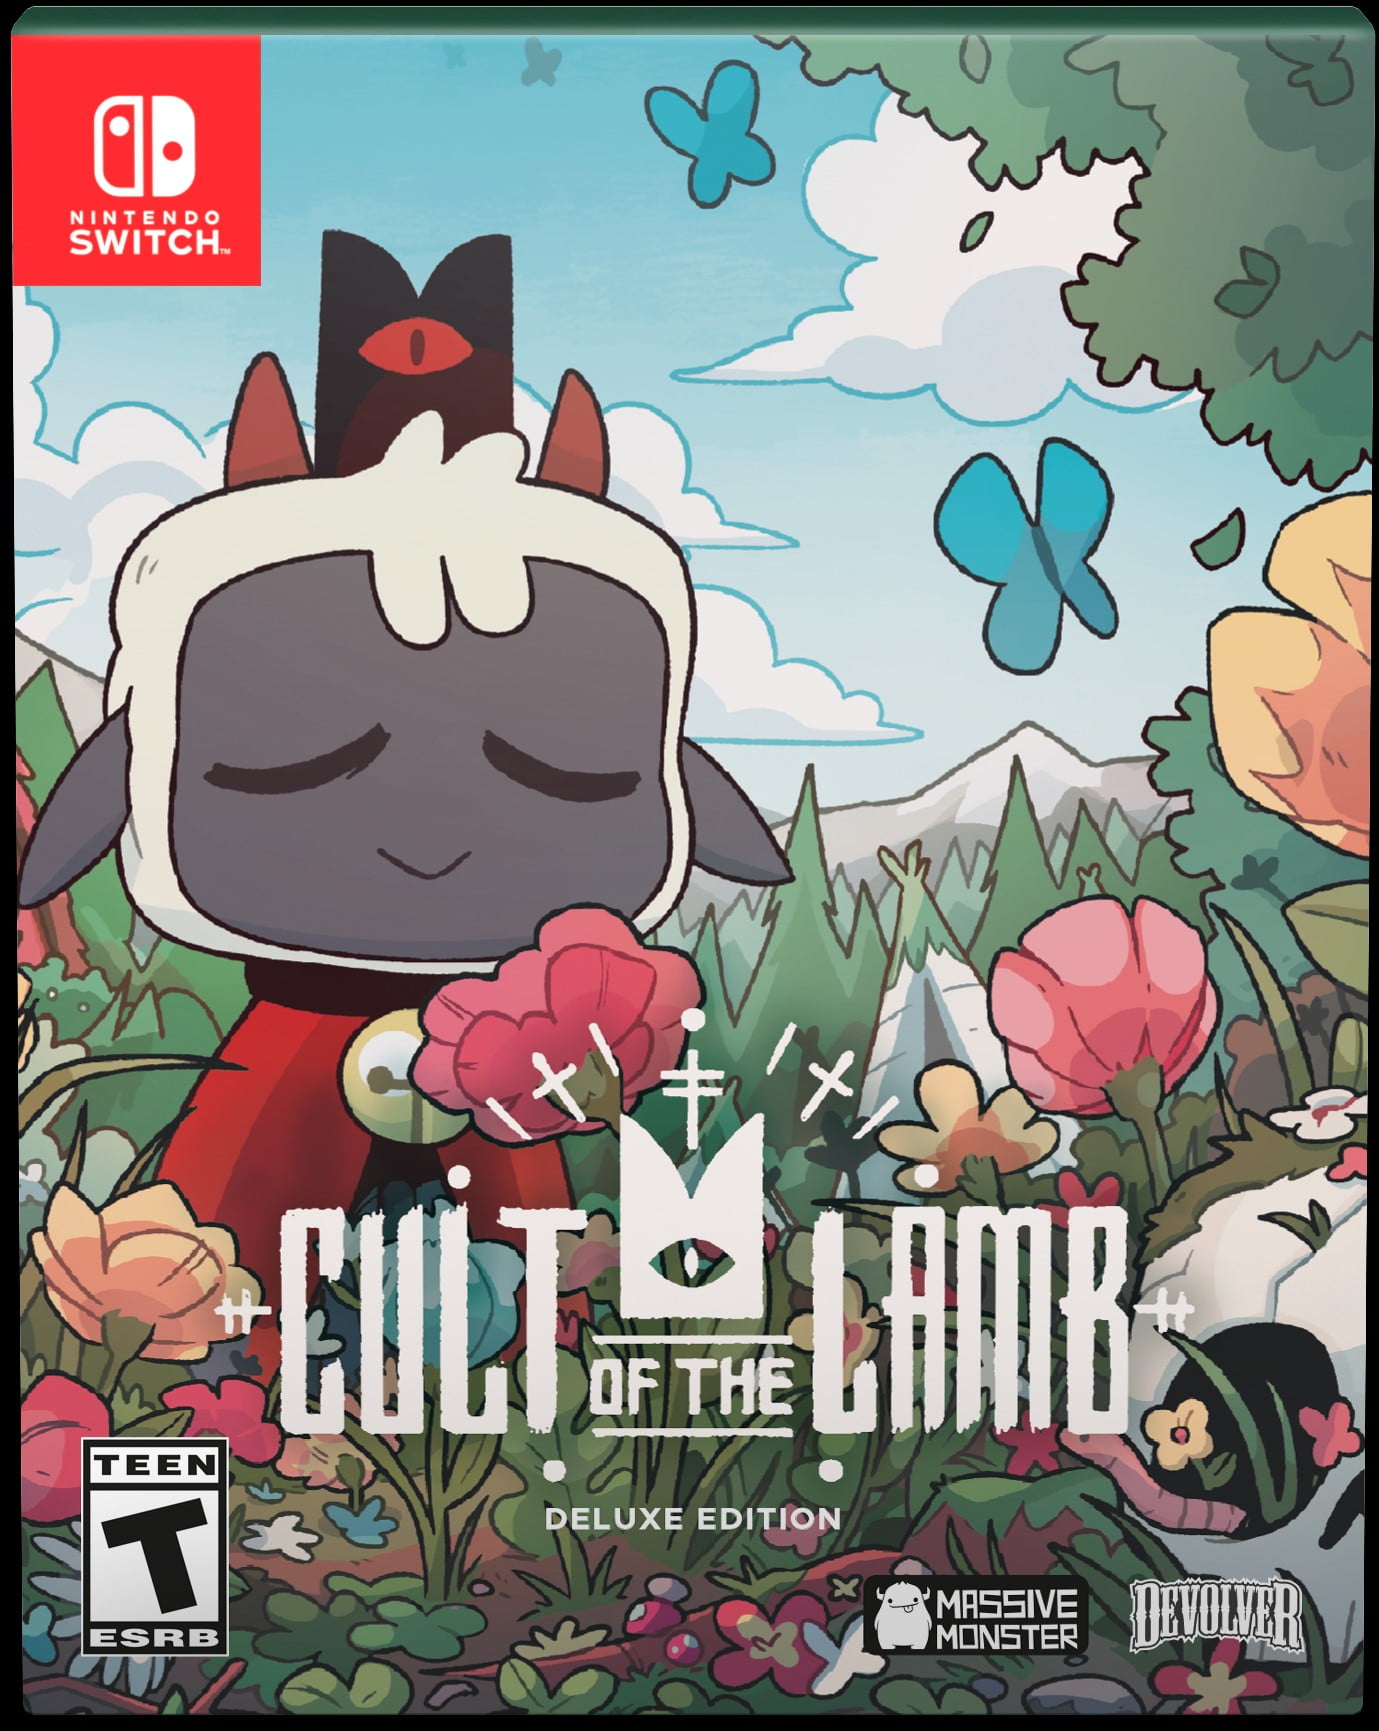 Cult Devolver Deluxe of Nintendo Edition, the Lamb Digital, 812303019333 Switch,